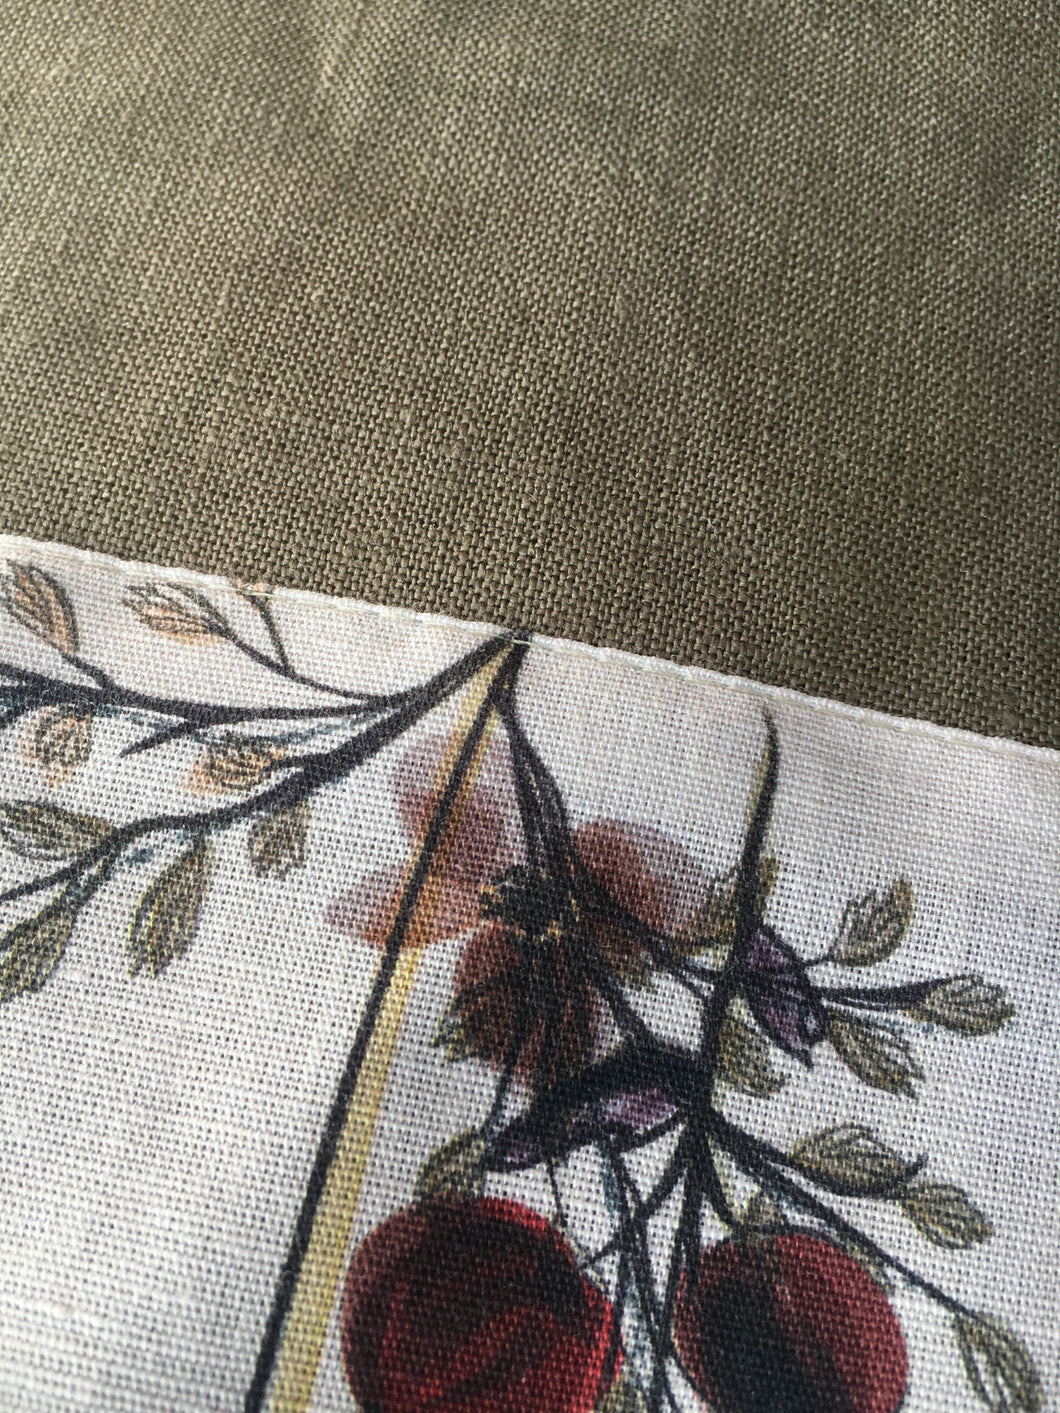 Crisp pewter coloured linen tea towel with a berry print feature. Great for drying glasses and beautiful enough to carry to the dining table. Traditional style manchester with a modern edge.